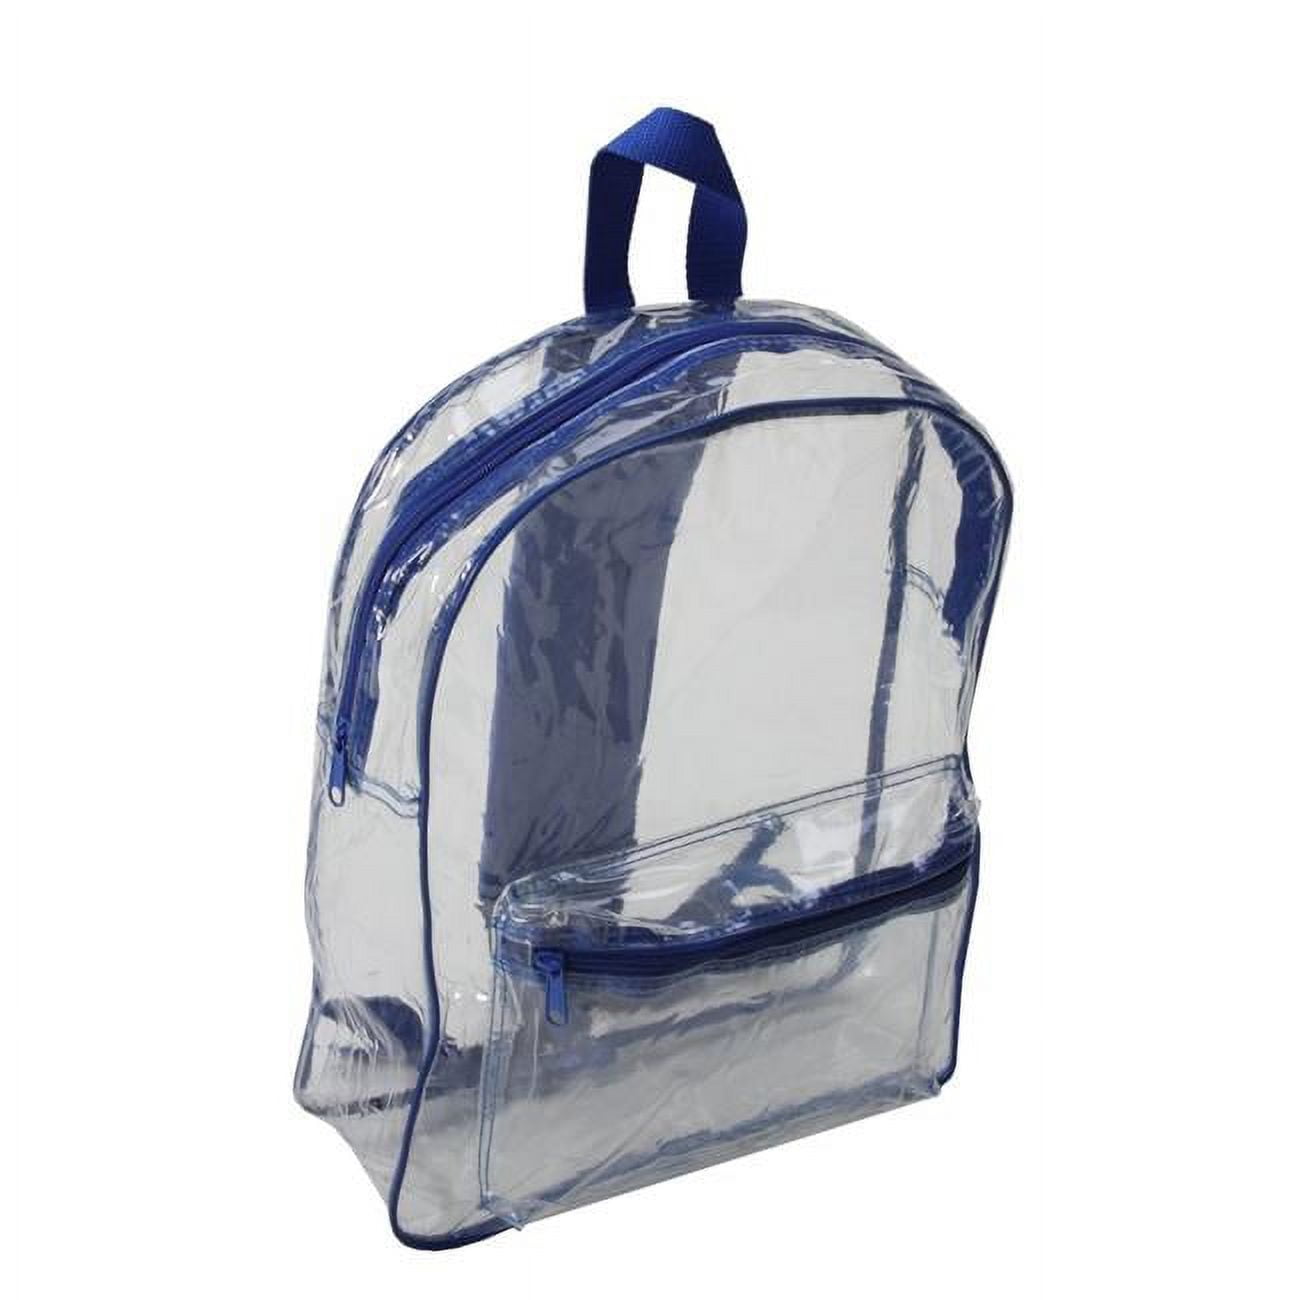 2336209 Clear Security Backpack, Royal Blue - Case Of 50